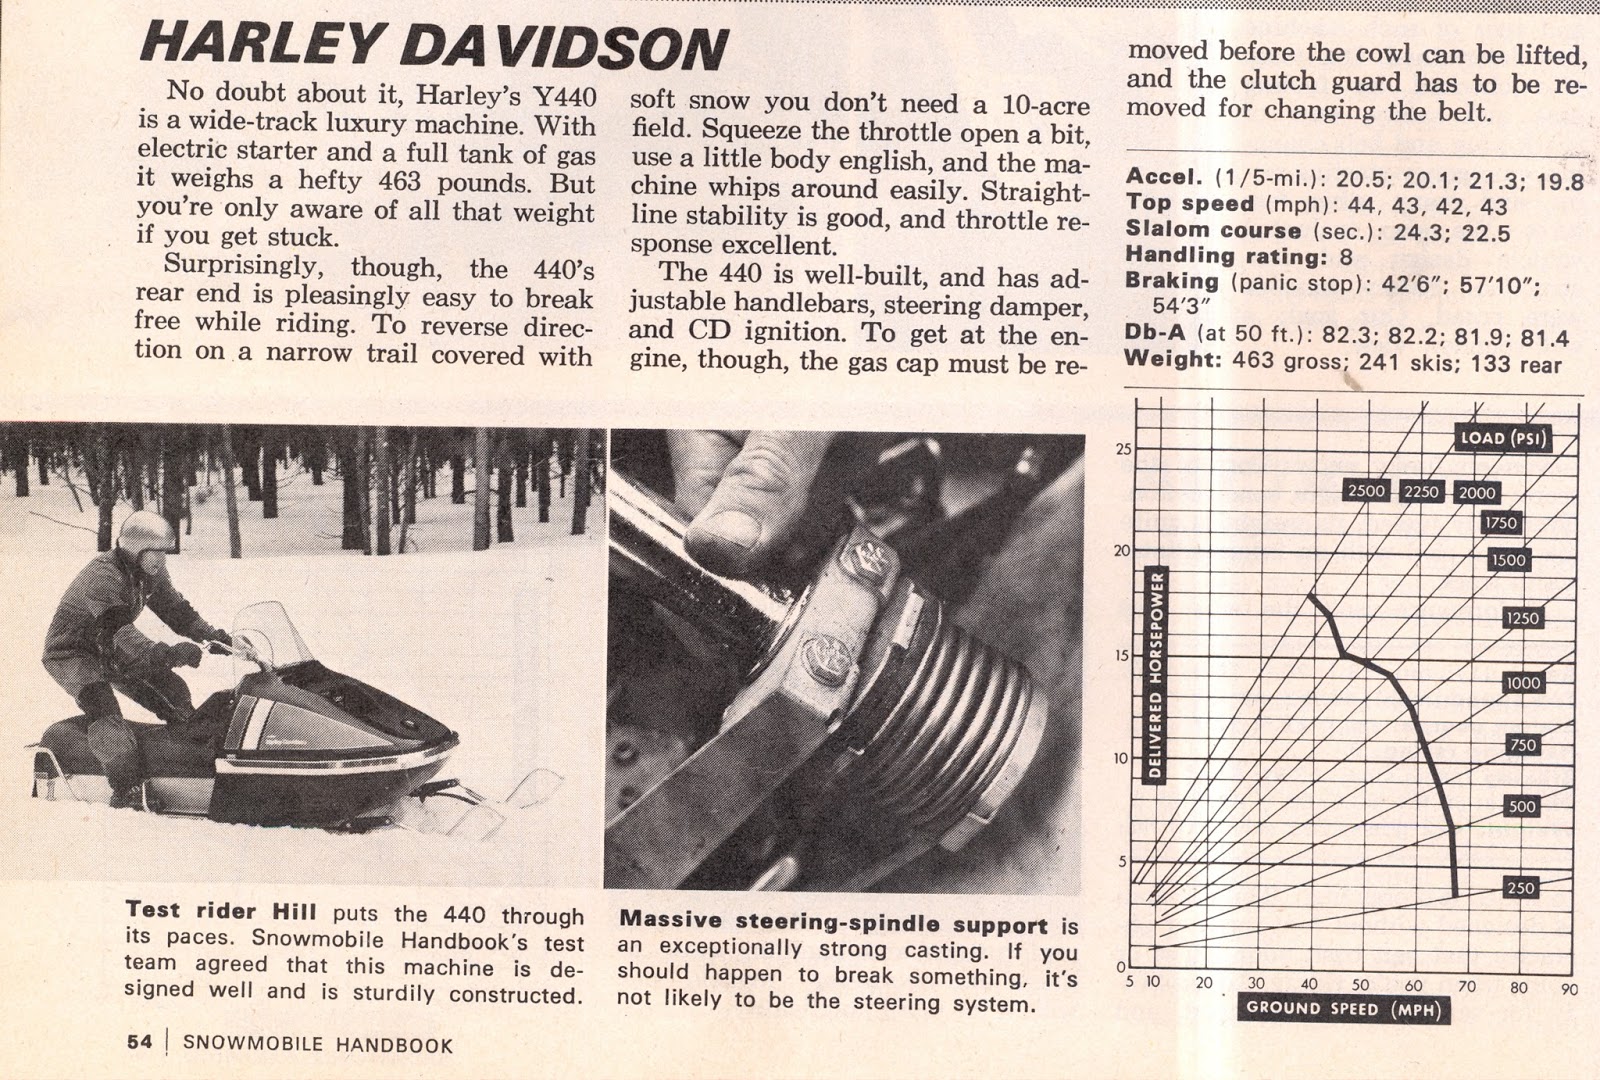 CLASSIC SNOWMOBILES OF THE PAST: TEST ON 1974 HARLEY DAVIDSON SNOWMOBILE